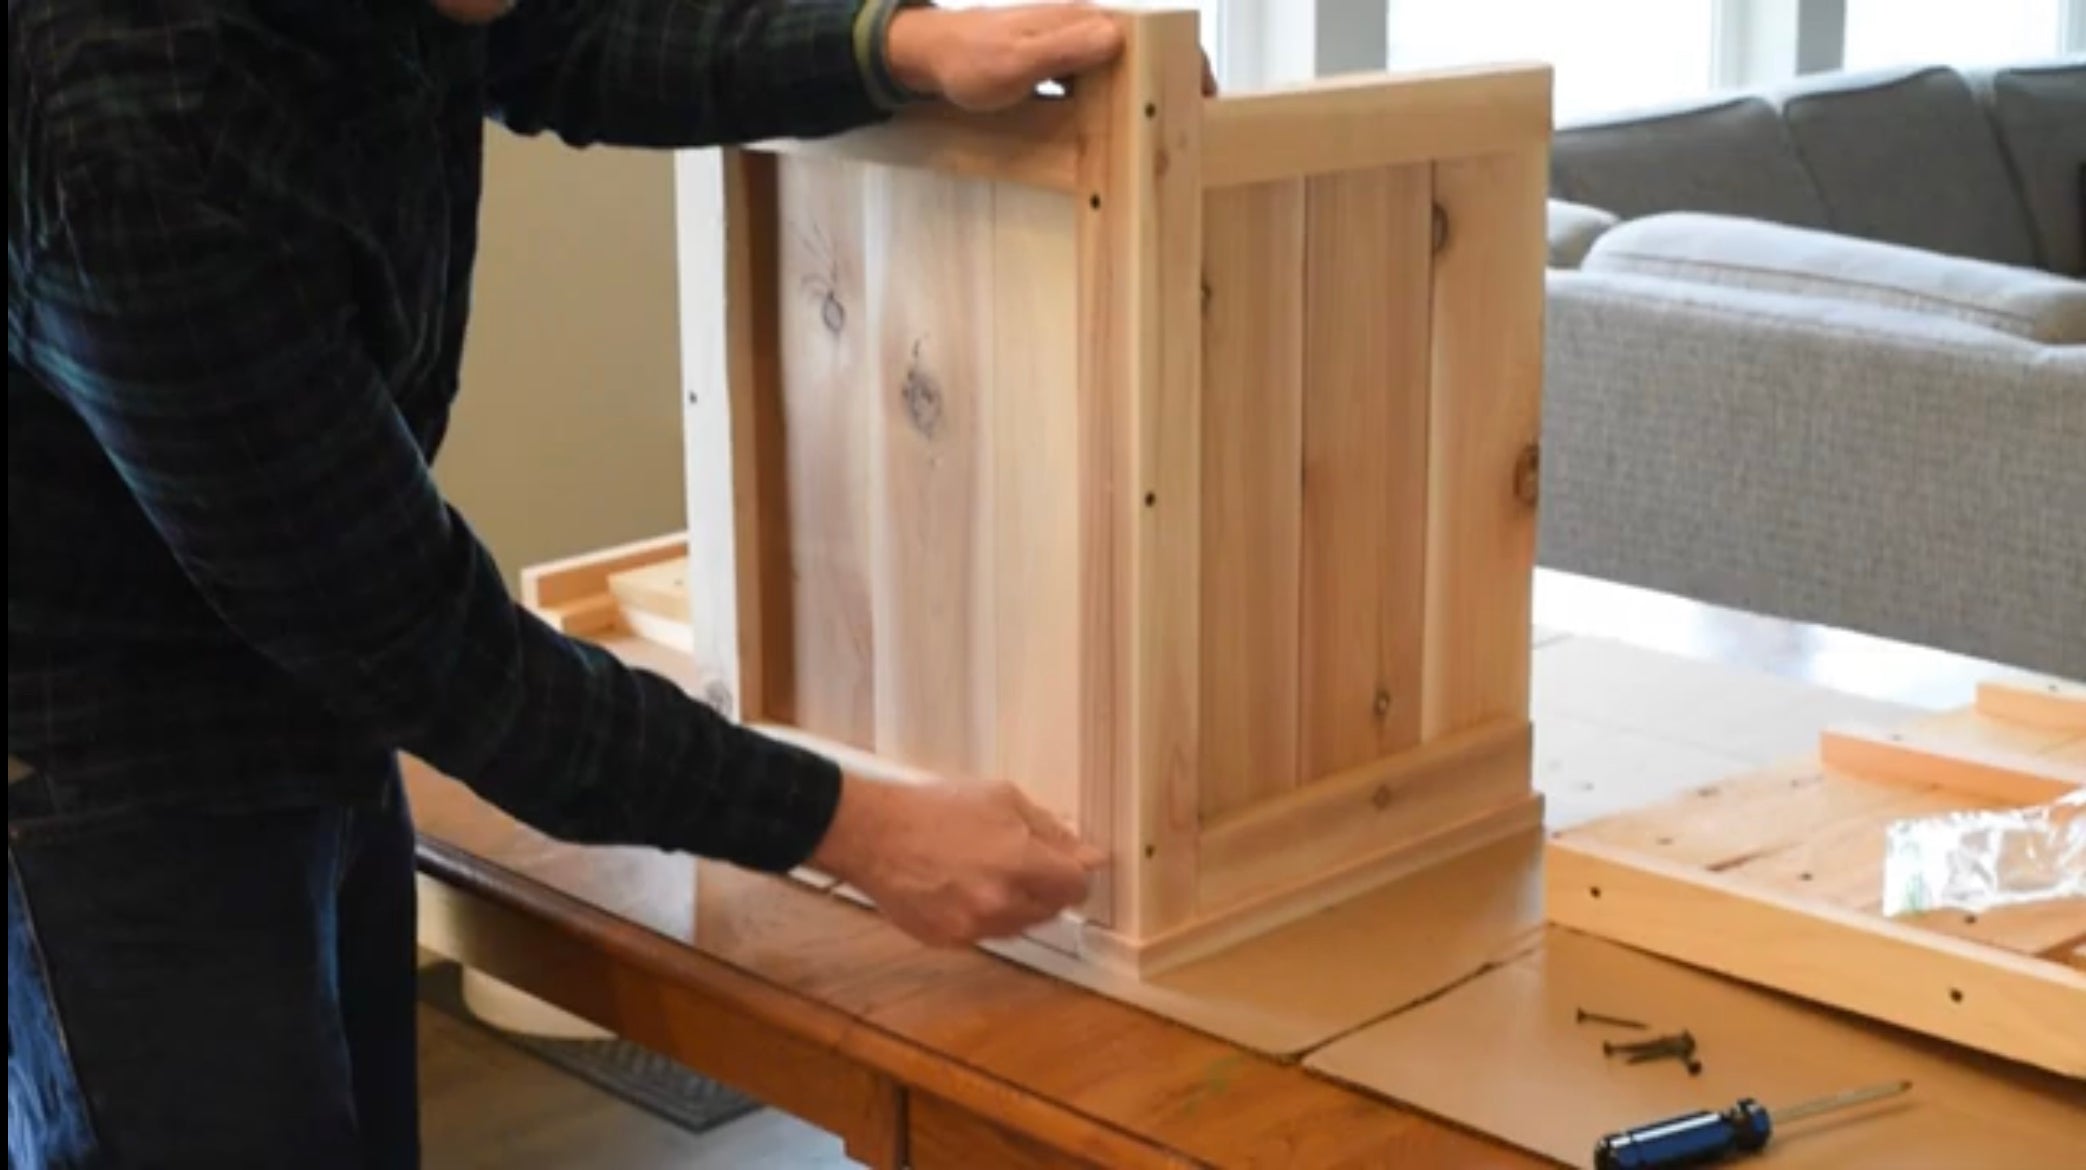 Load video: Instructional video on how to properly assemble a planter box from Woodland Edges